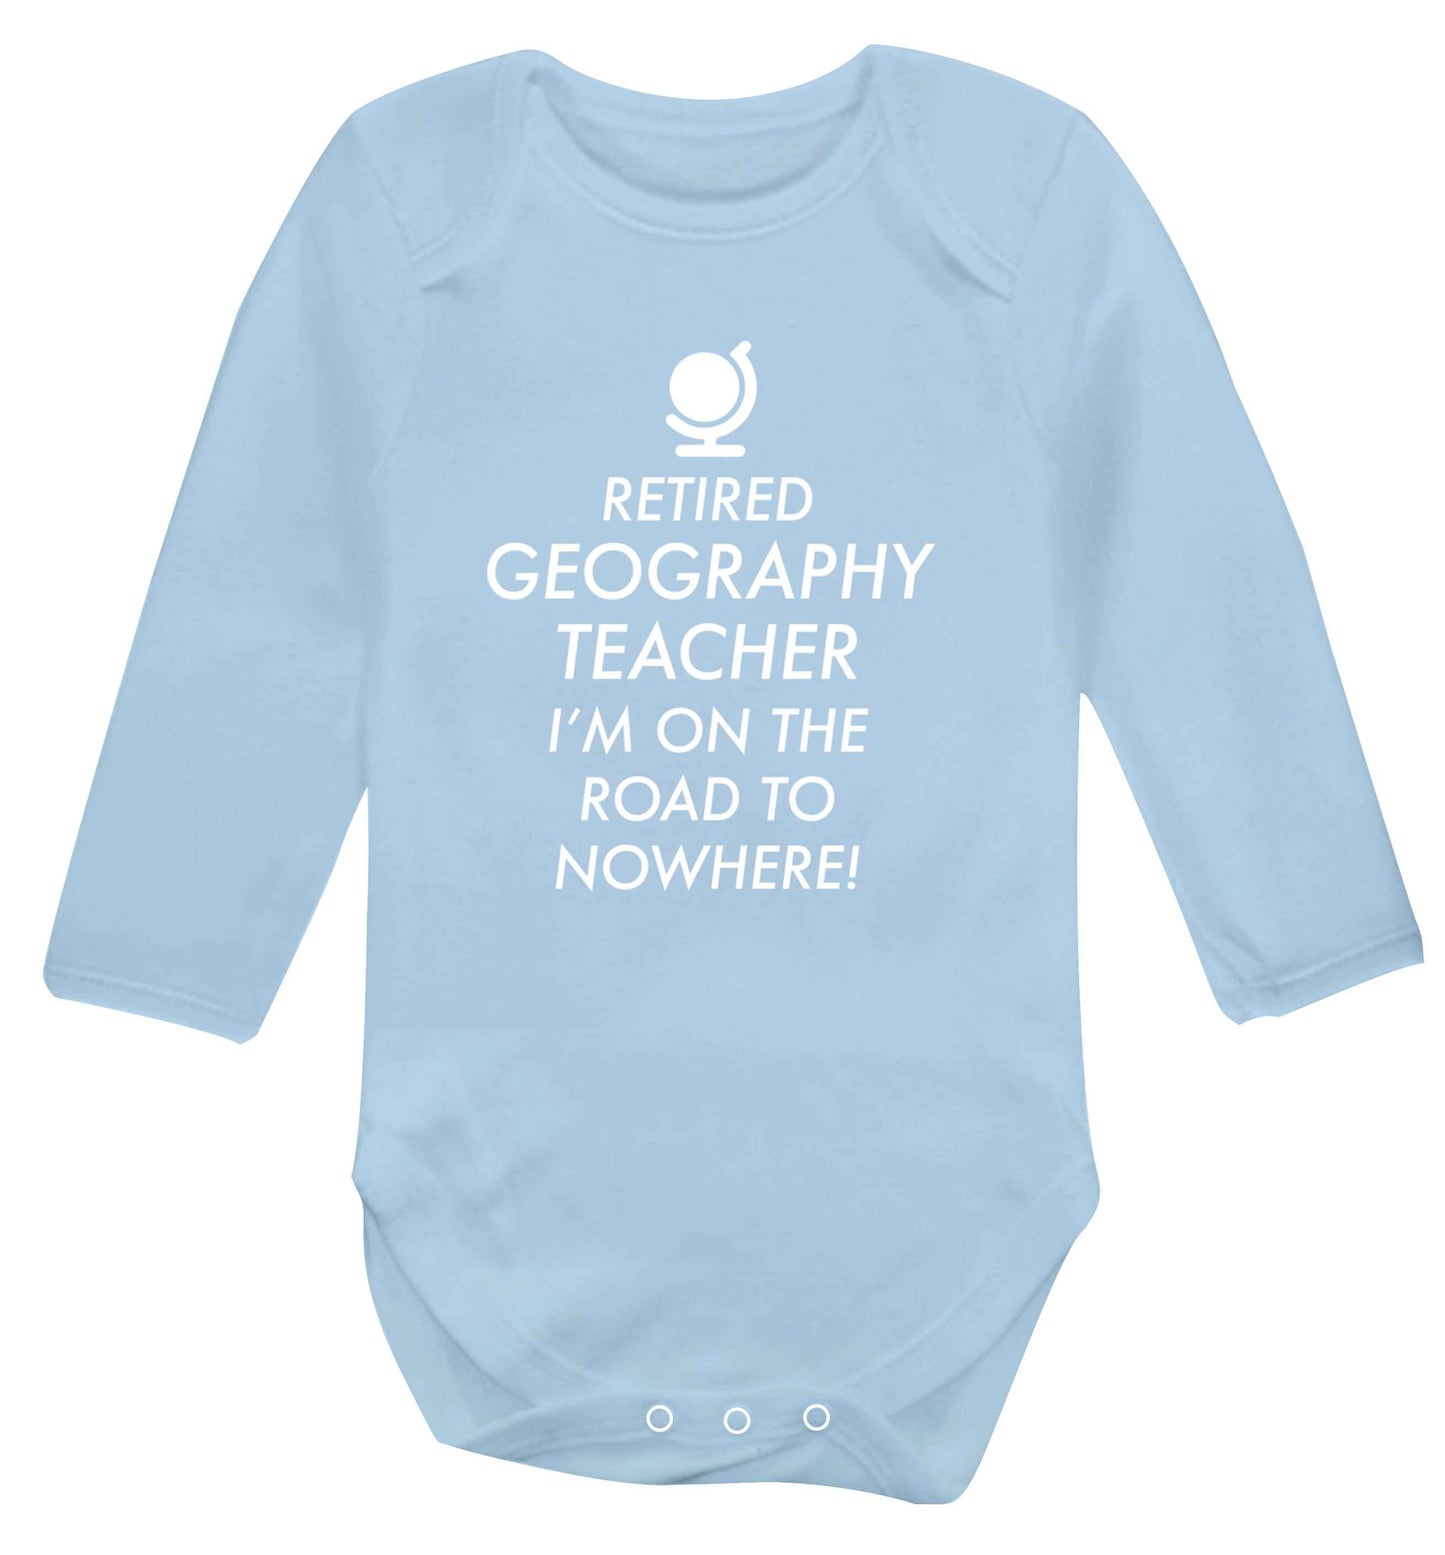 Retired geography teacher I'm on the road to nowhere Baby Vest long sleeved pale blue 6-12 months